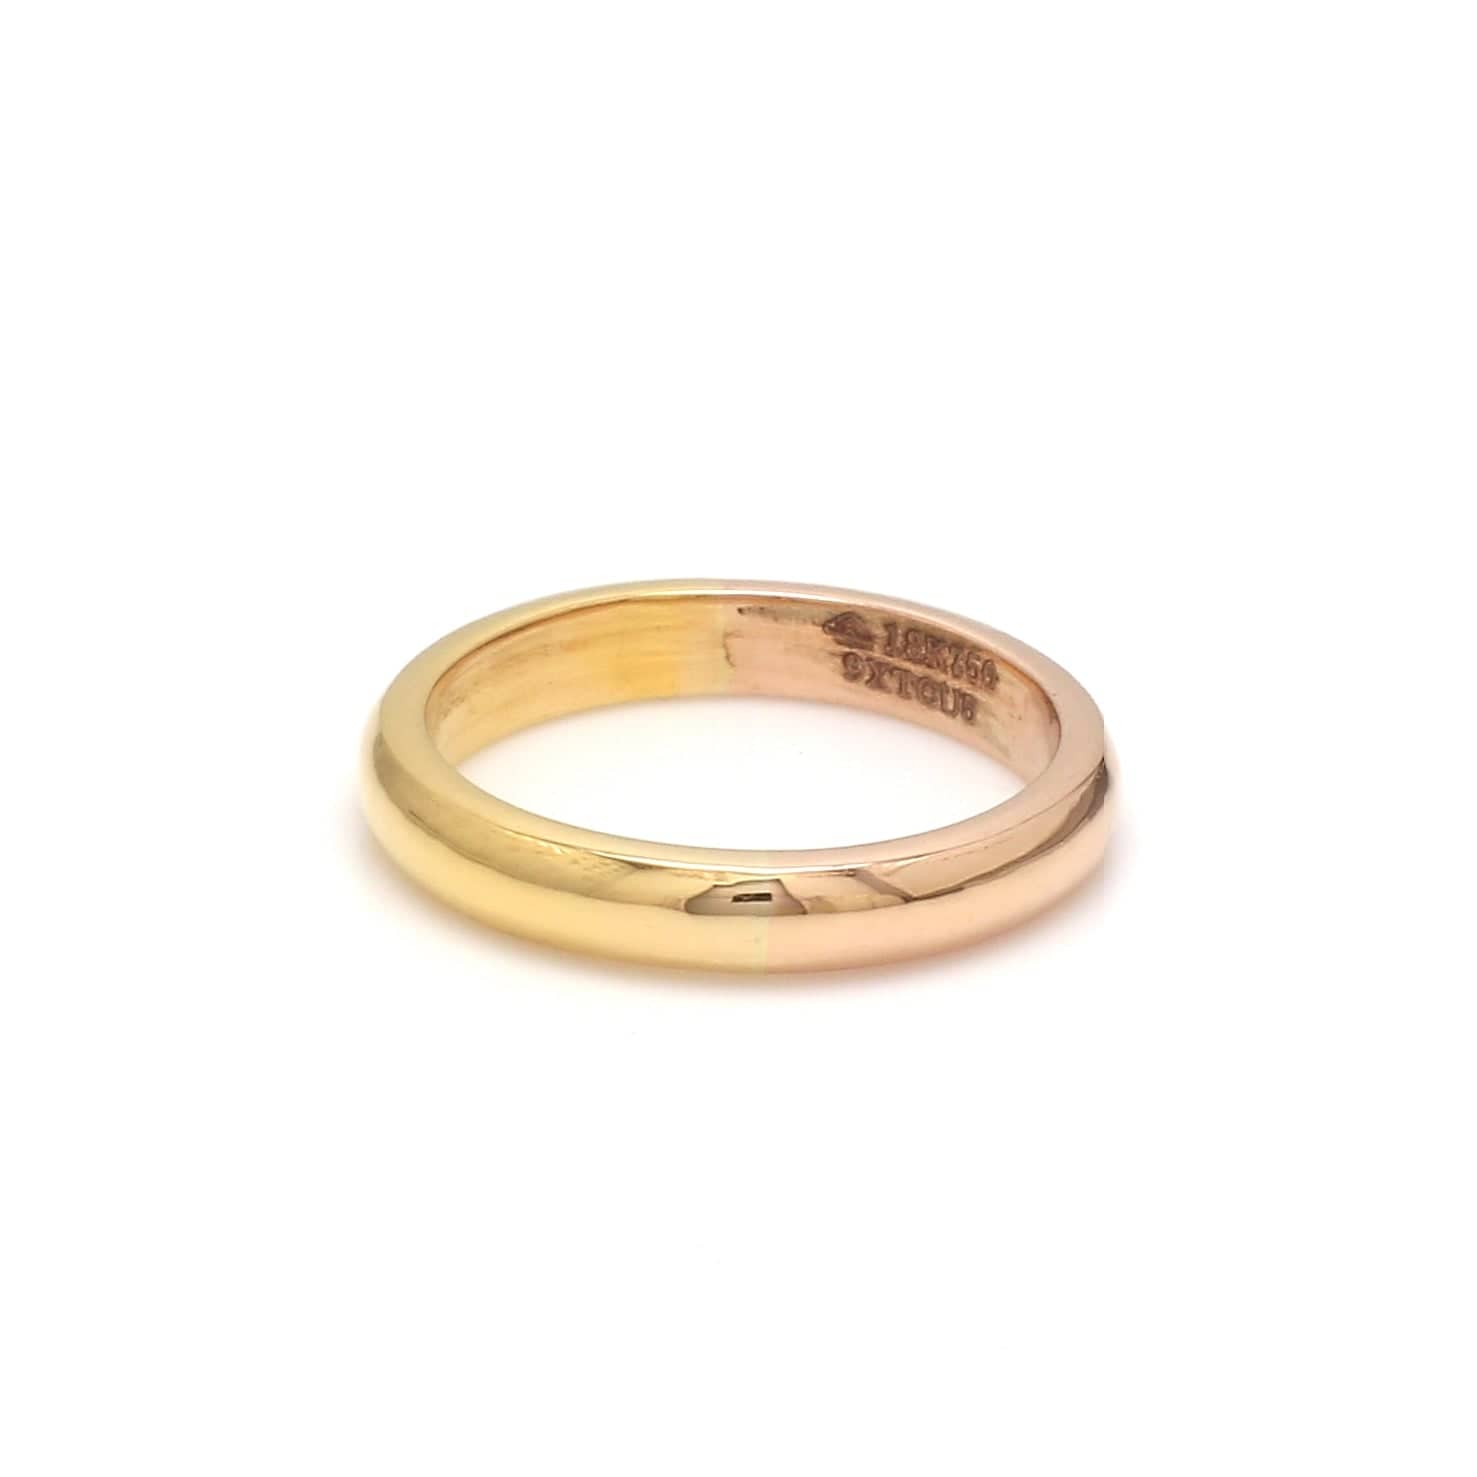 Cartier Trinity Ring, Classic, White Gold, Yellow Gold, Rose Gold,  Certificate. 14.9 Grams - Estates Consignments Cartier Trinity Ring,  Classic, White Gold, Yellow Gold, Rose Gold, Certificate. 14.9 Grams